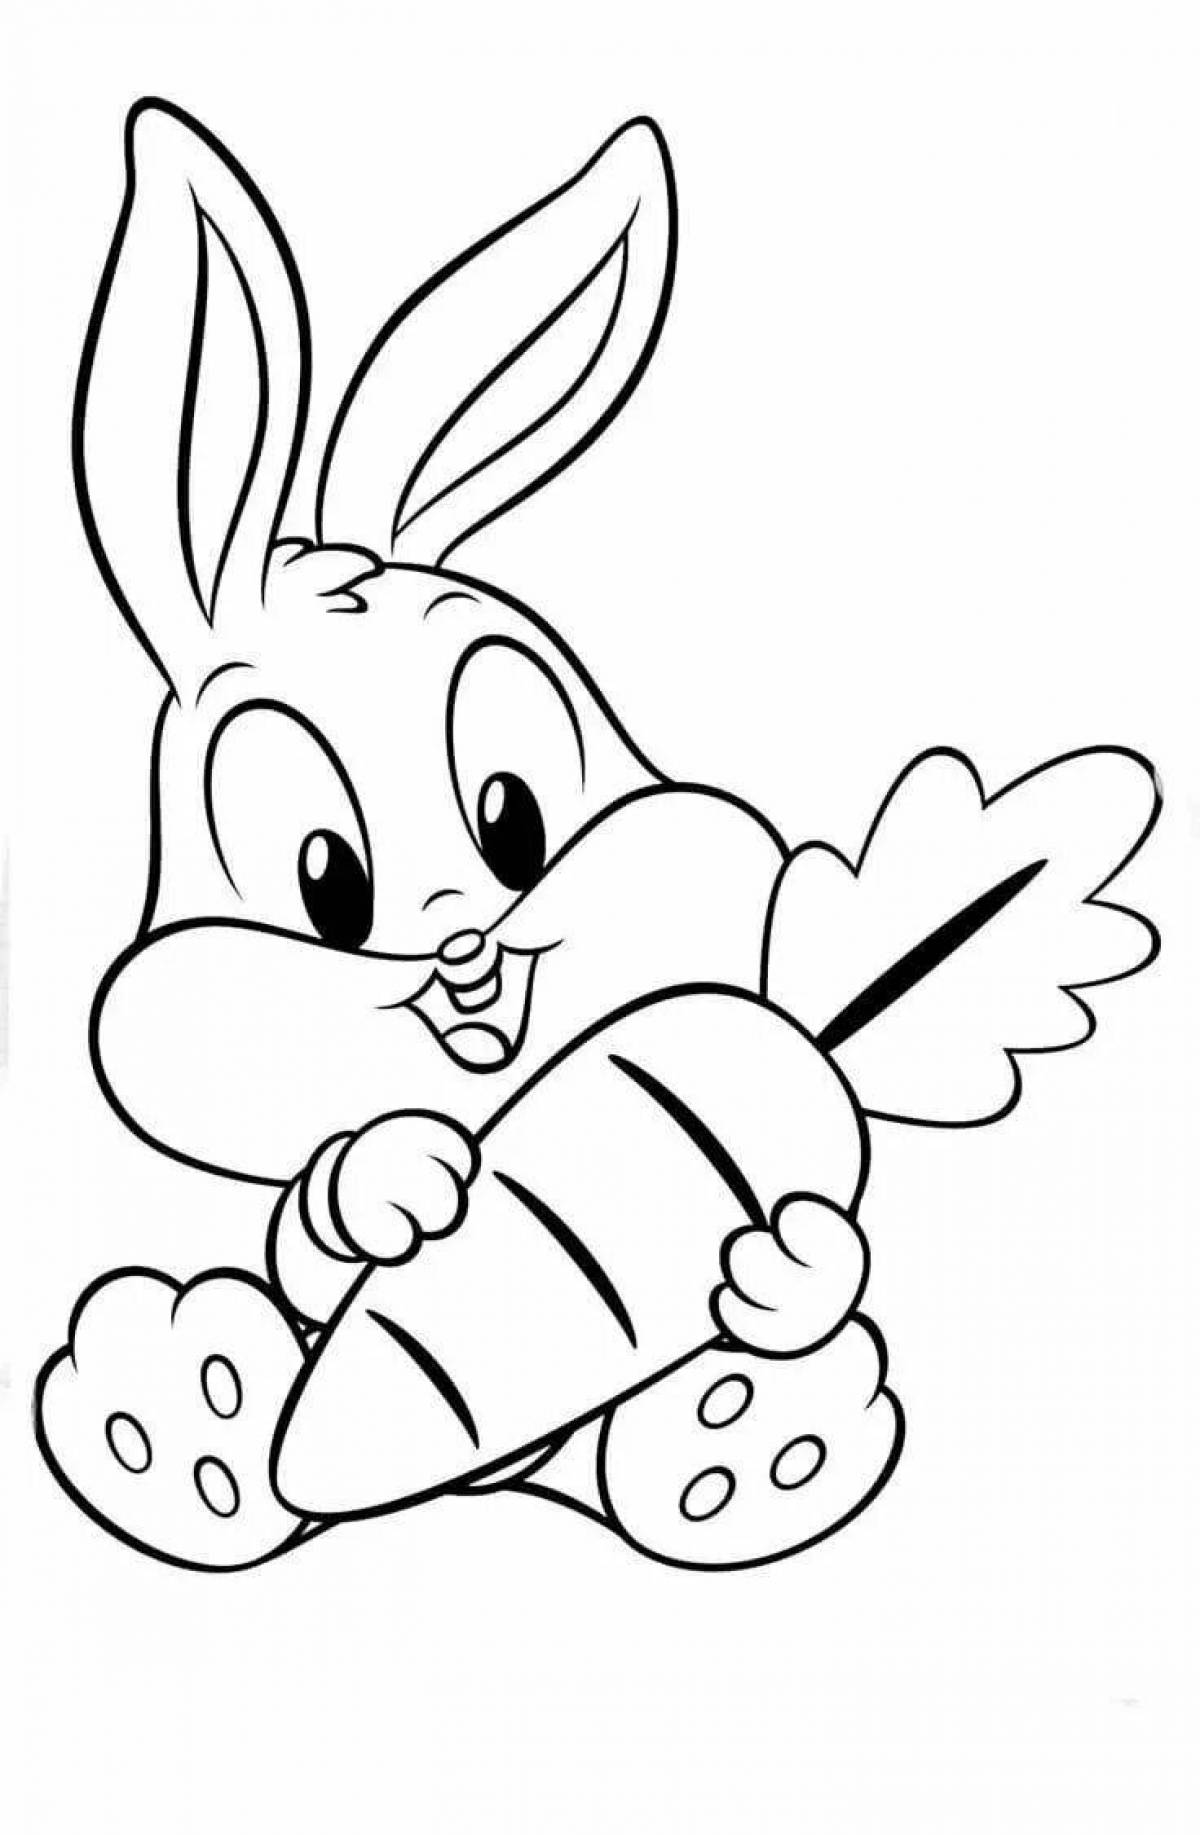 Whimsical bunny drawing for kids